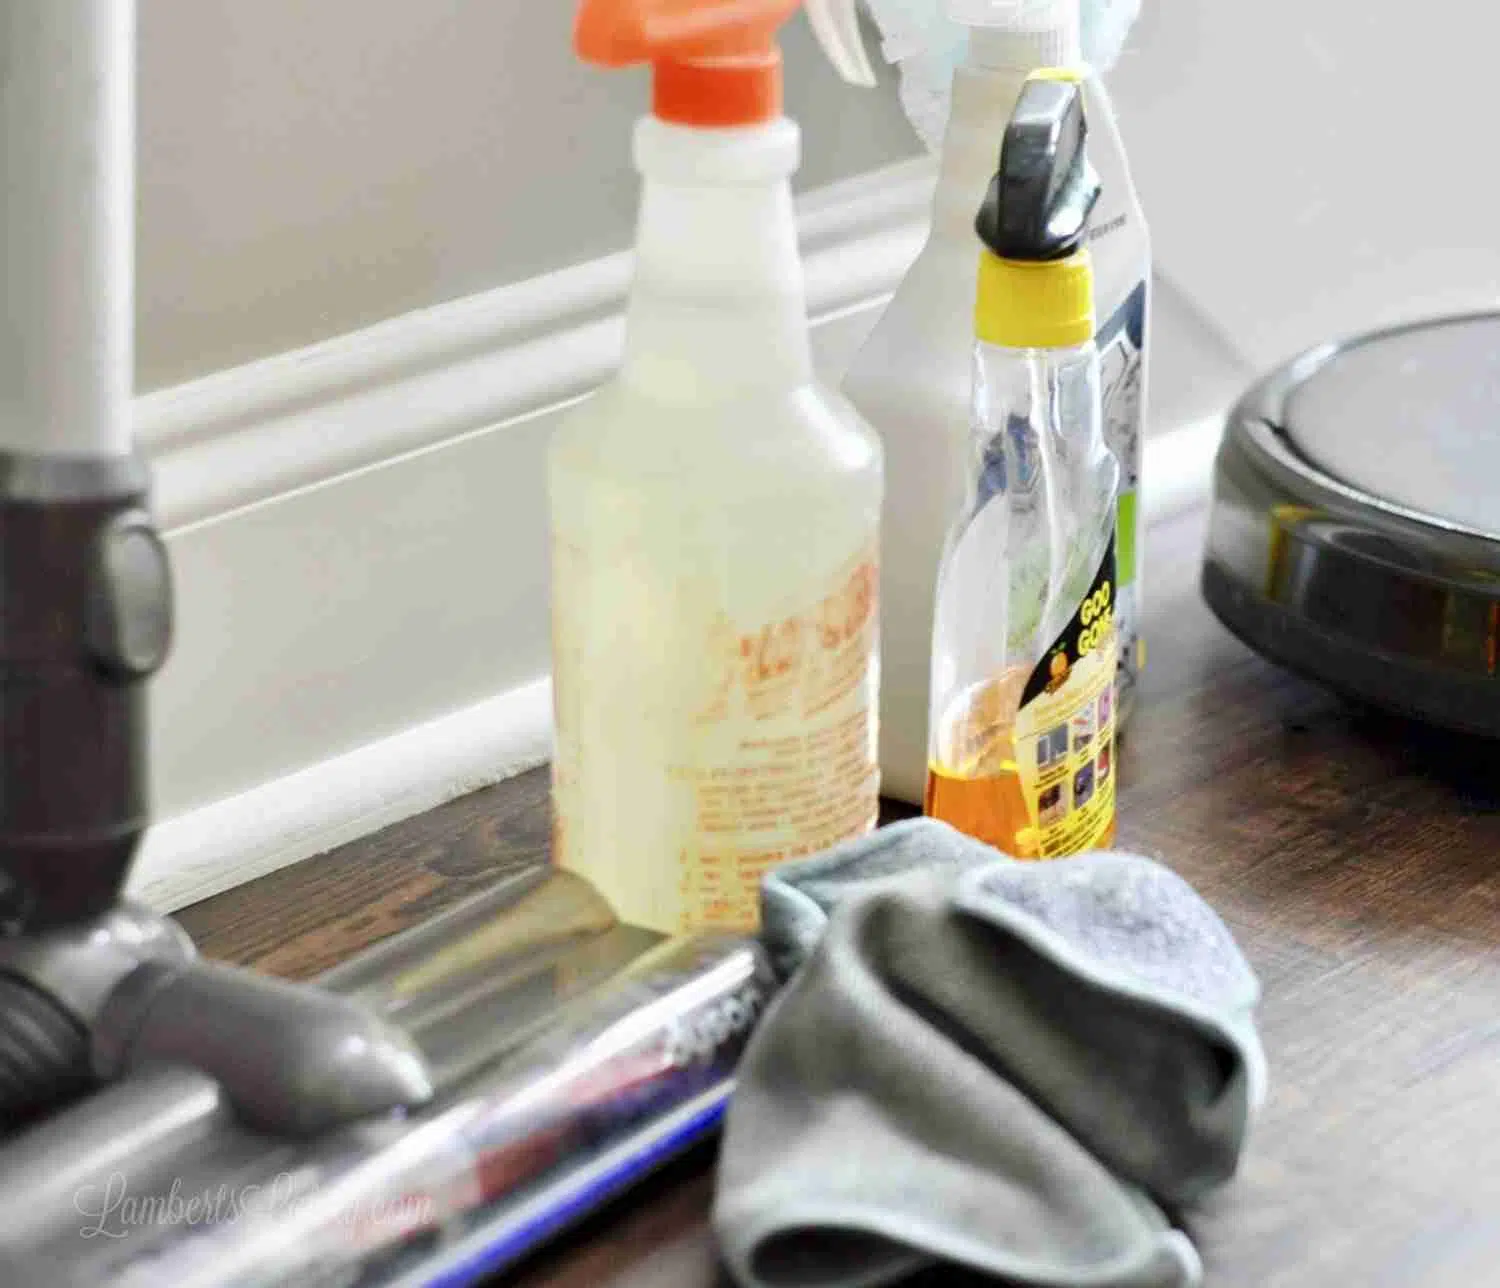 My Best House Cleaning Supplies List - Intro